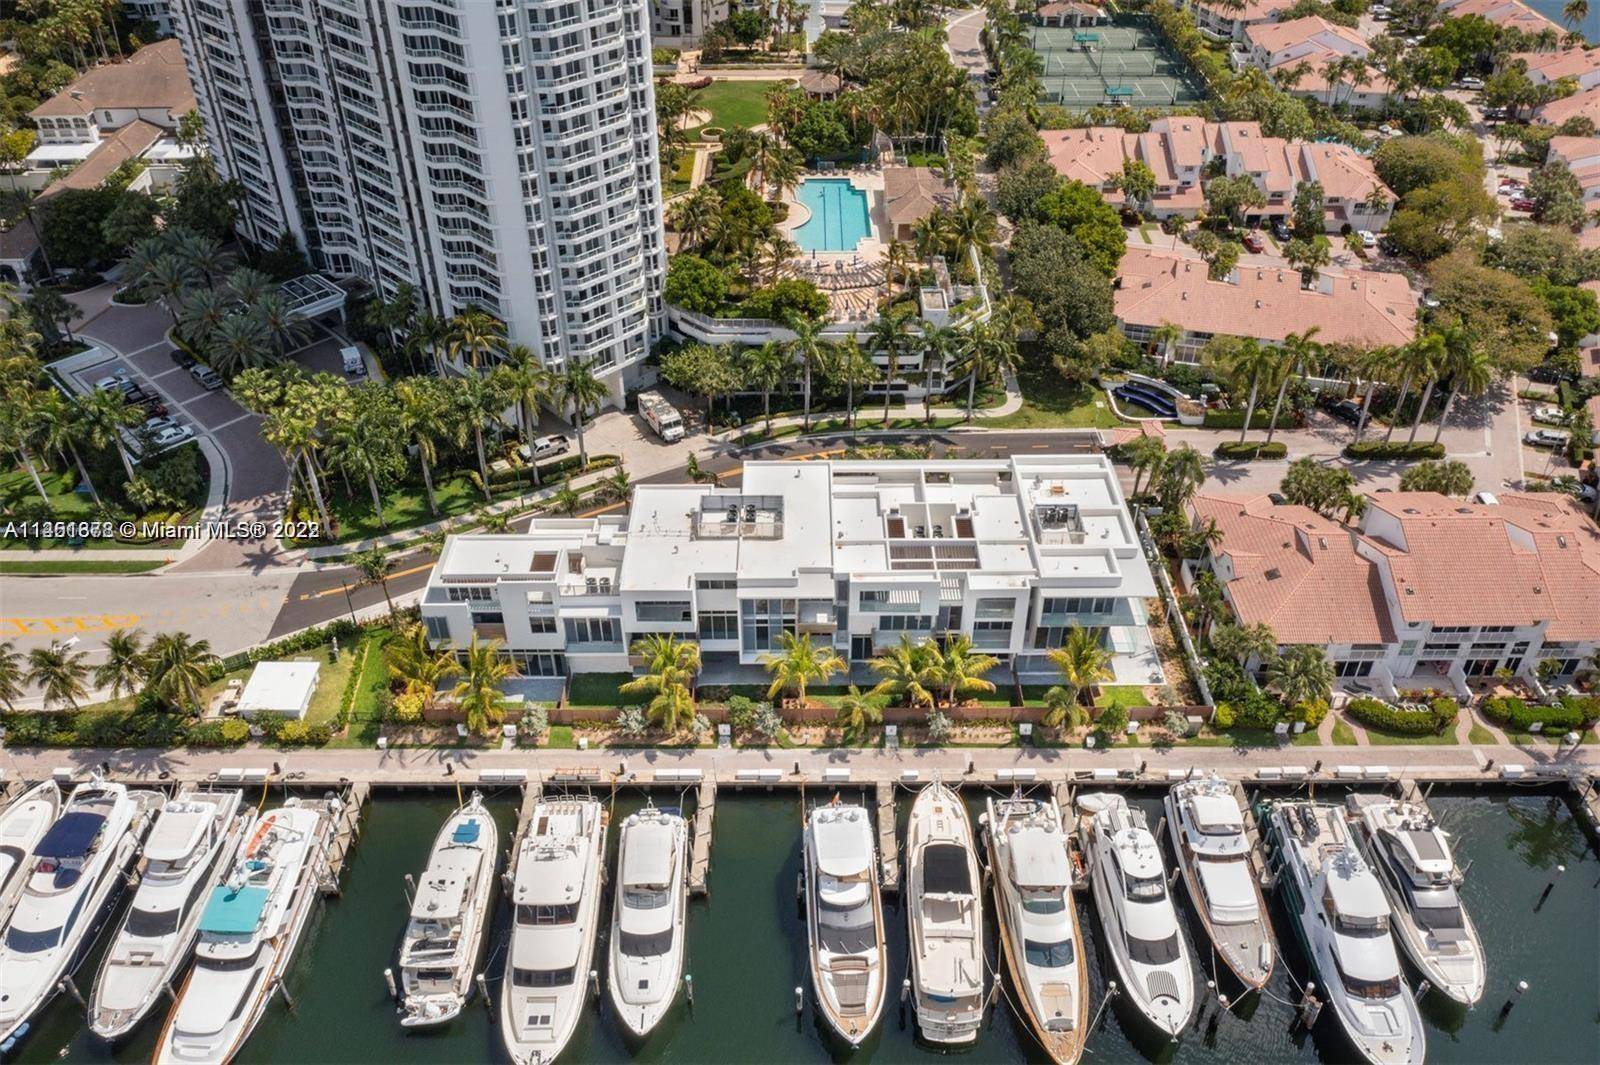 Fabulous opportunity to buy a 90 x 22 FT Boat Slip plus one large dock box in the gated, private Waterways Marina Aventura.